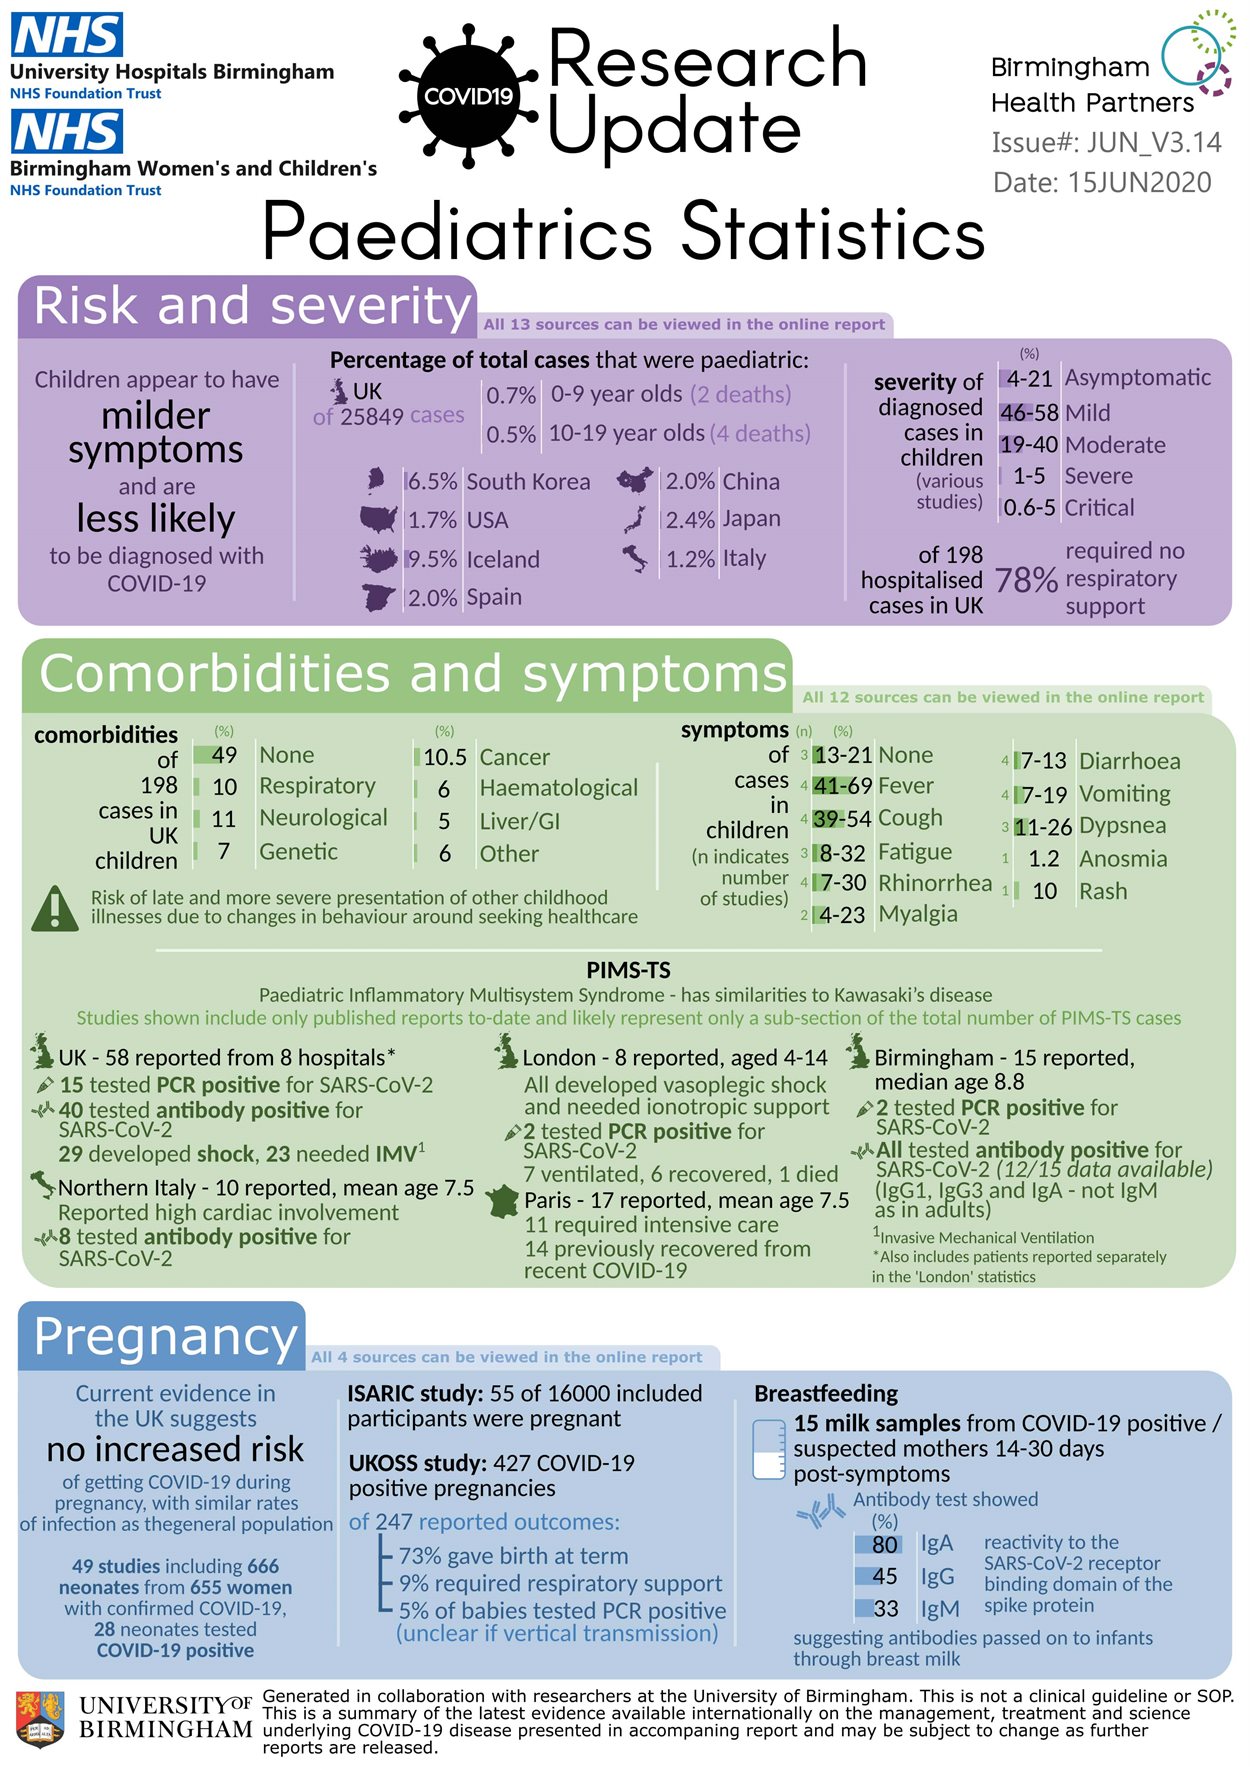 Infographic with information on COVID-19 and paediatric patients